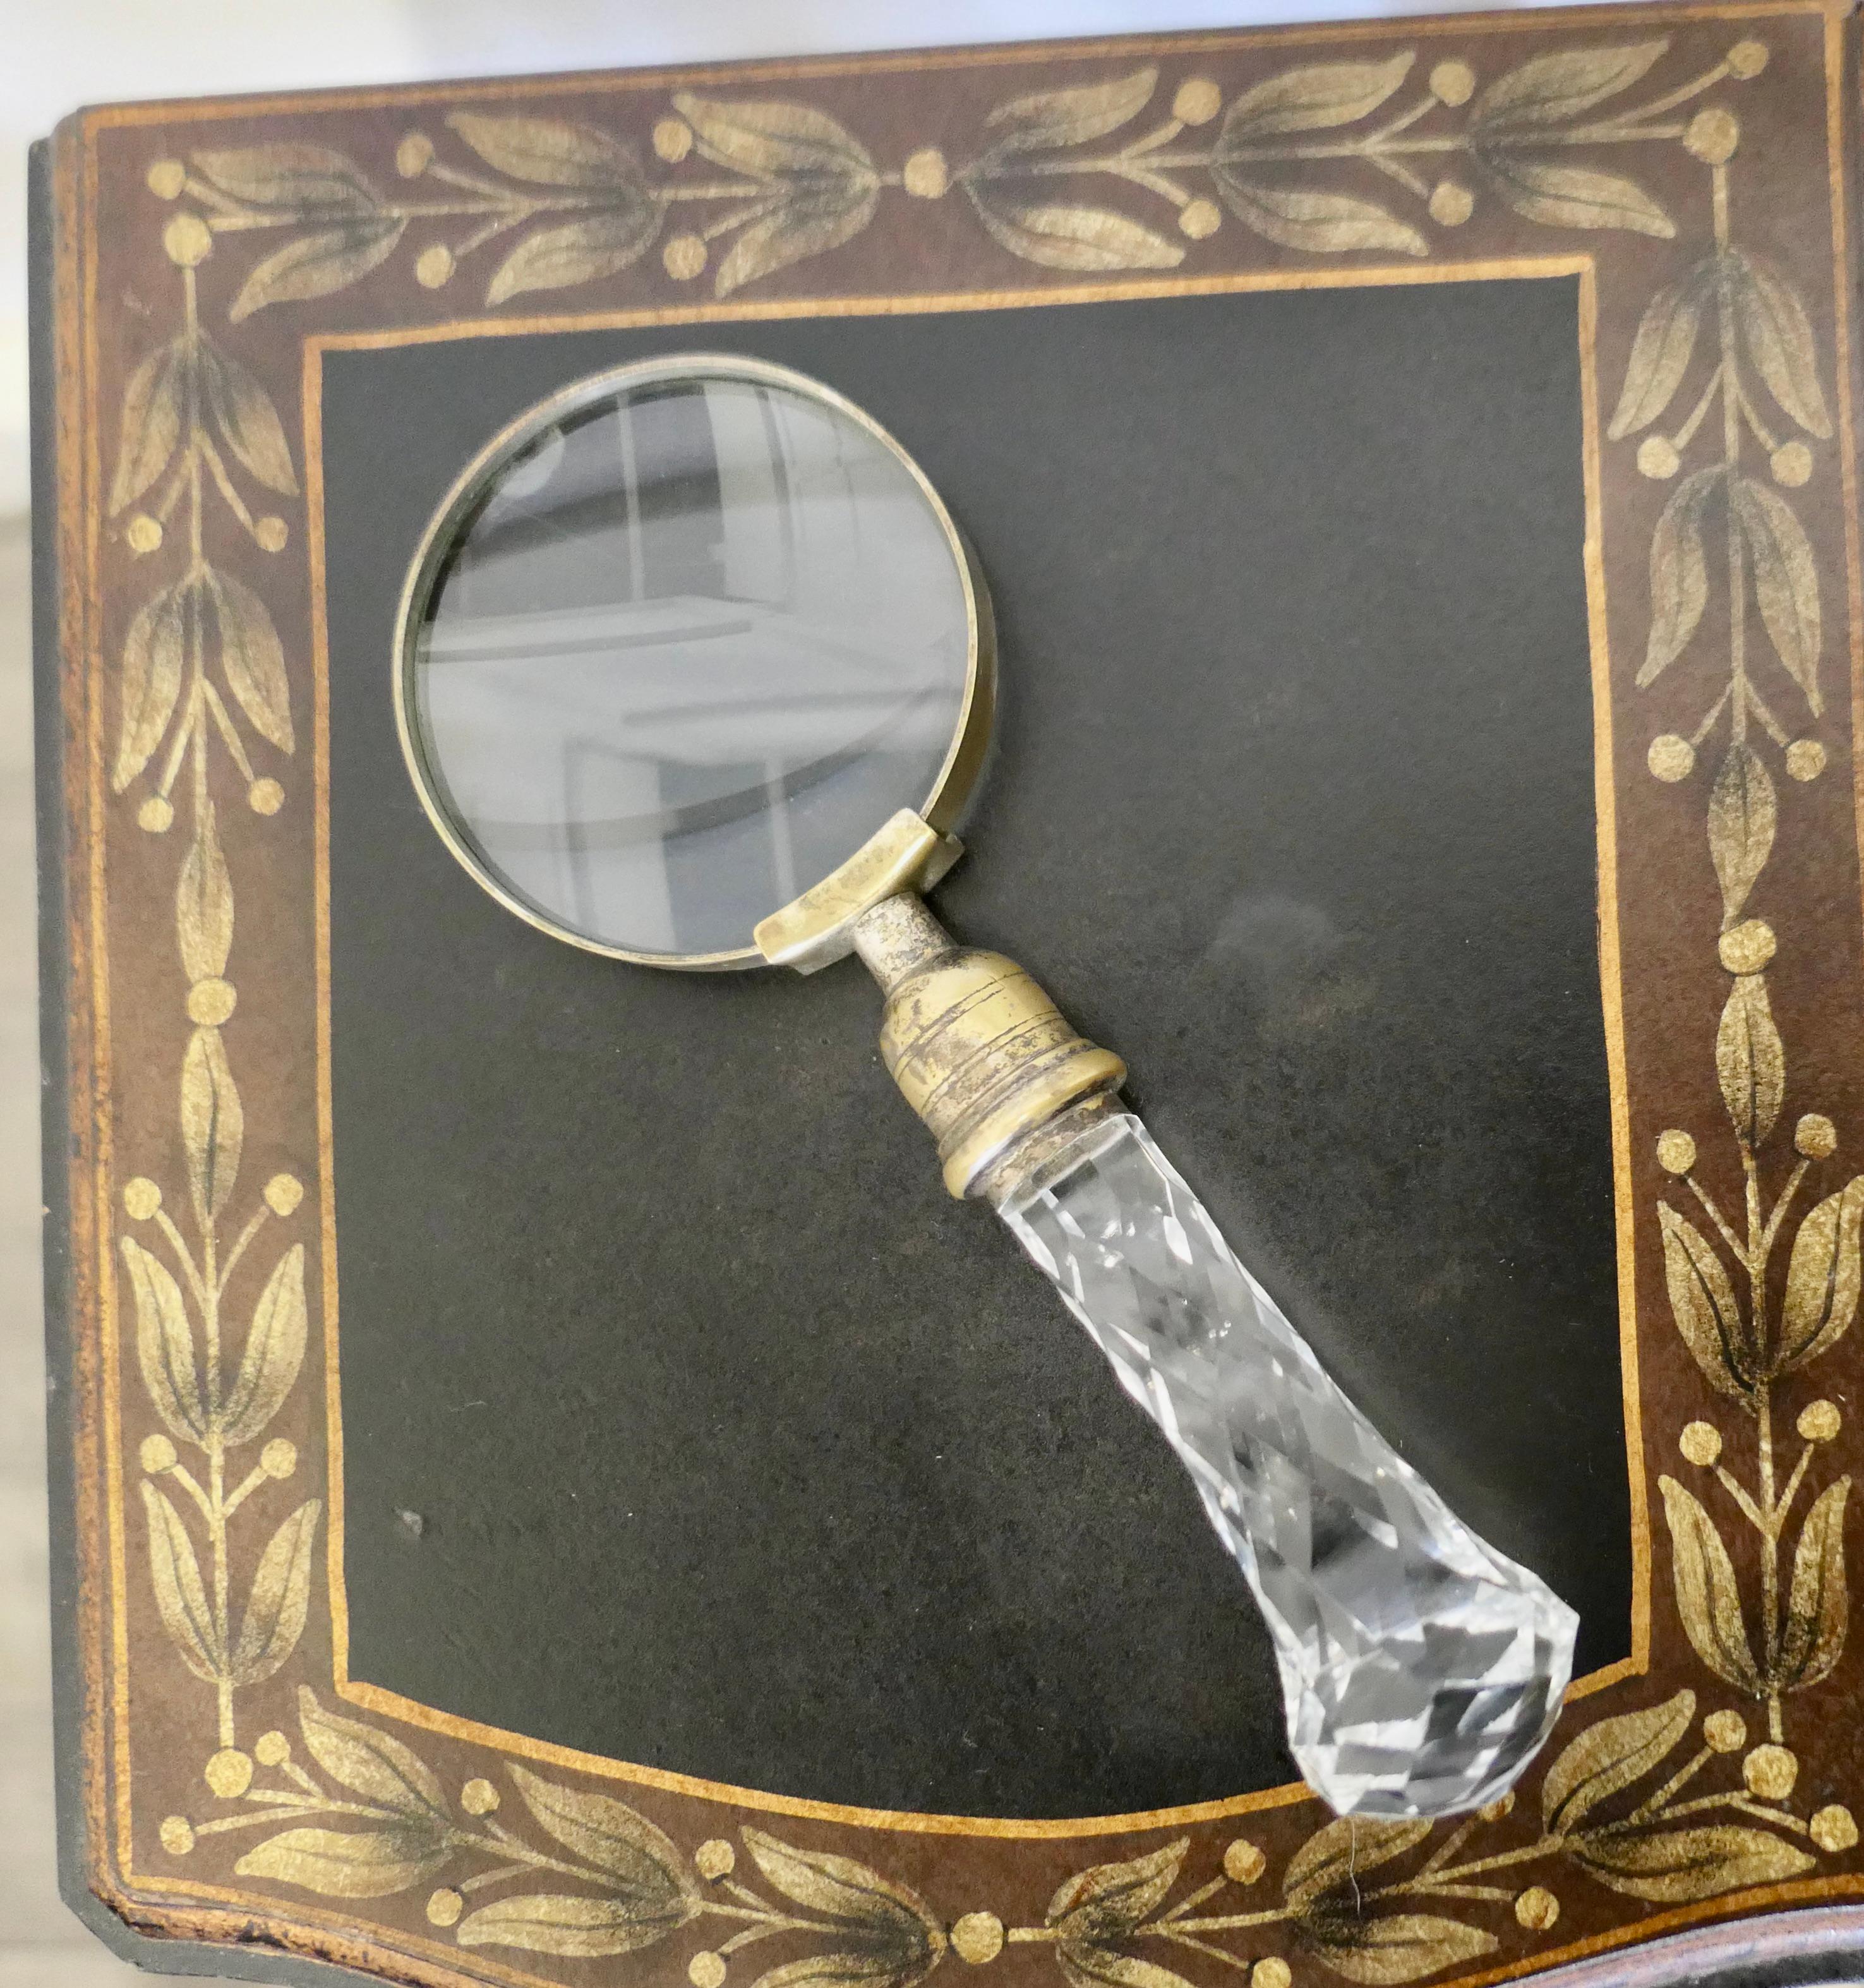 Hand Held Magnifying Glass with Faceted Glass Handle

A lovely piece for your study in good vintage condition with a chunky knob handle
The Glass is 8” long, the lens is 3” in diameter.